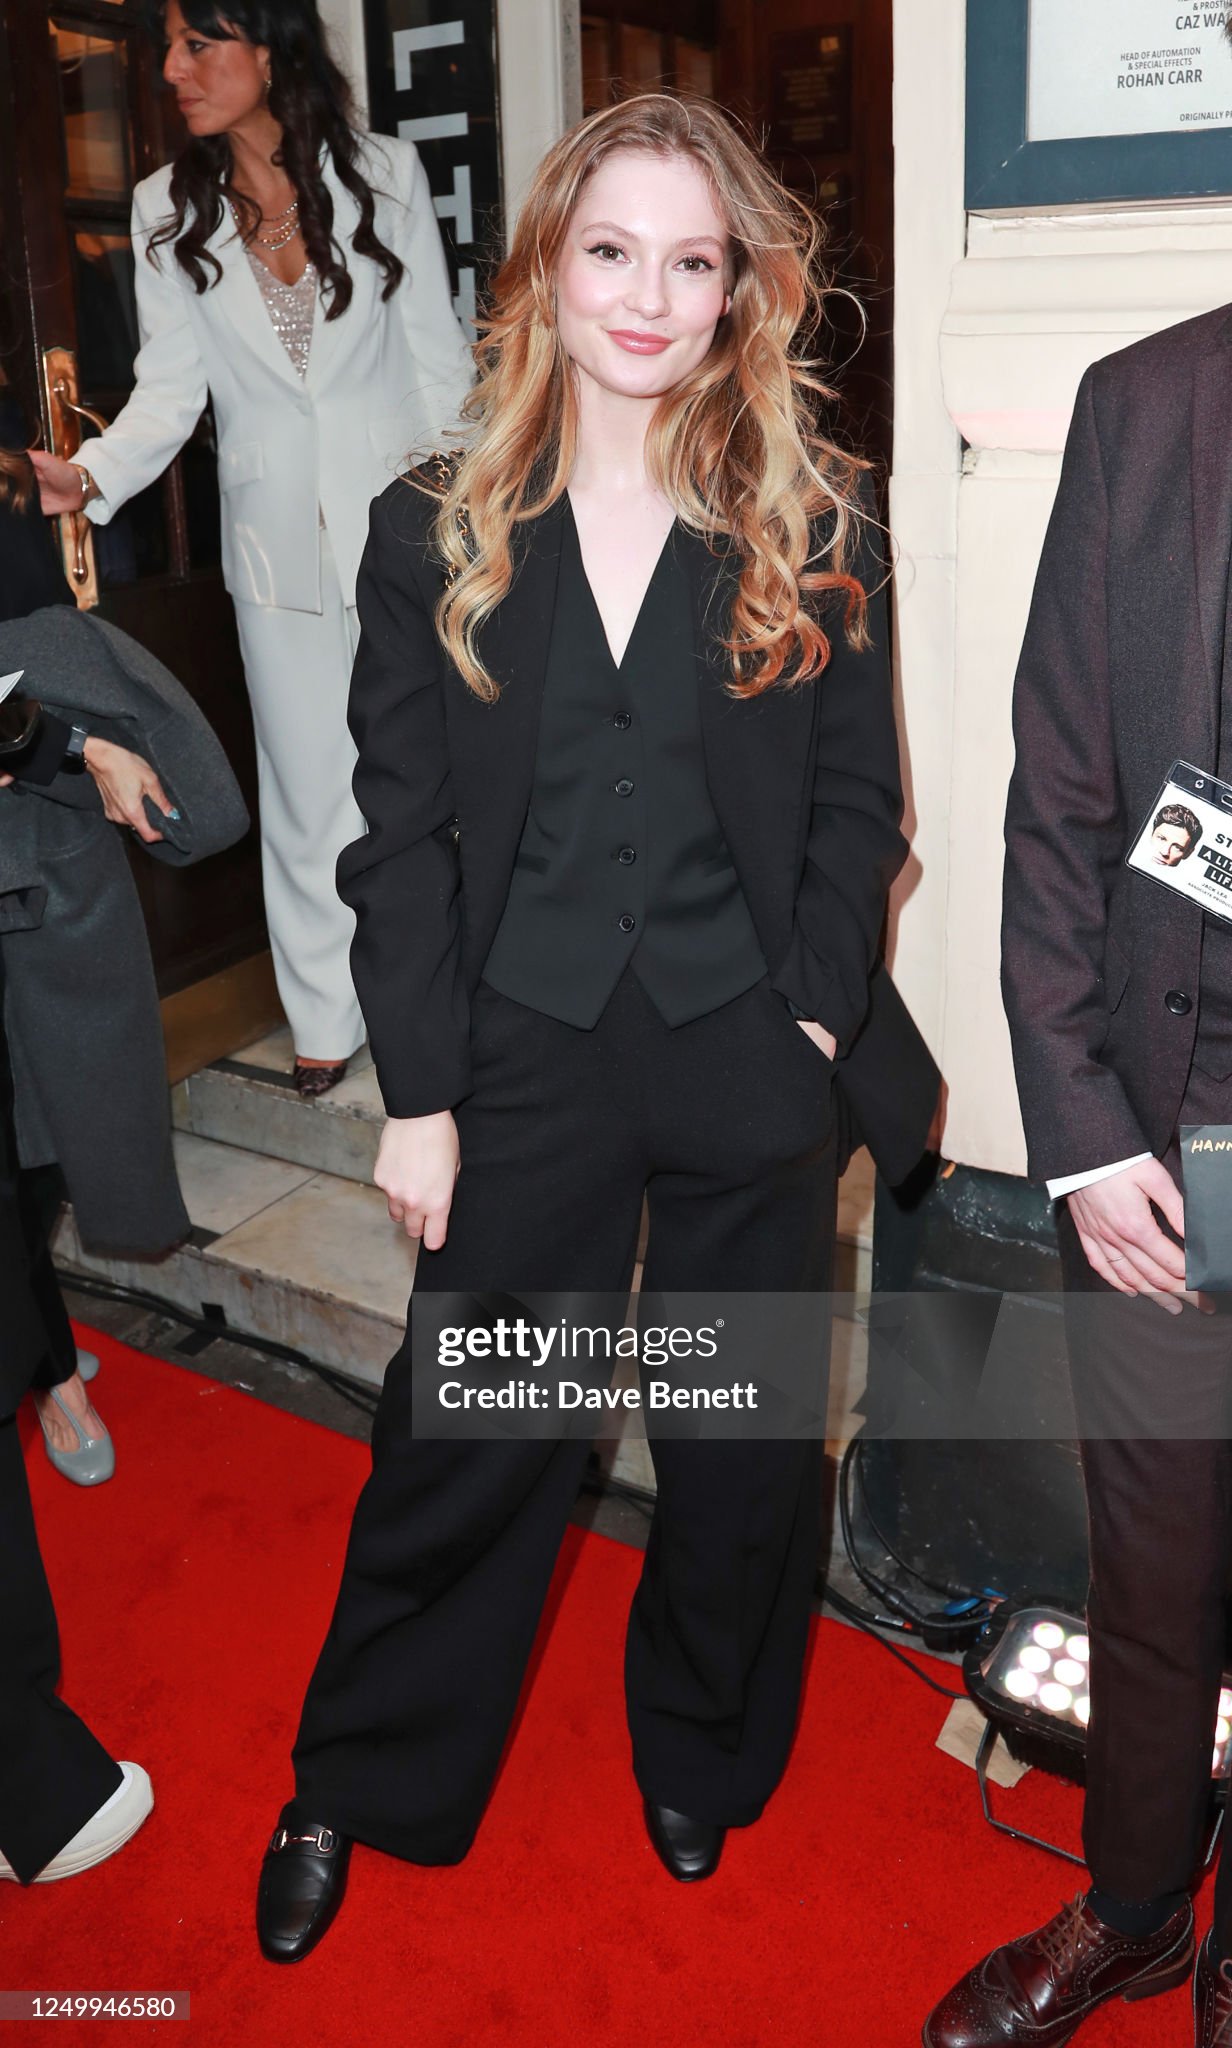 Hannah Dodd - attends press night performance of "A Little Life" in HQ